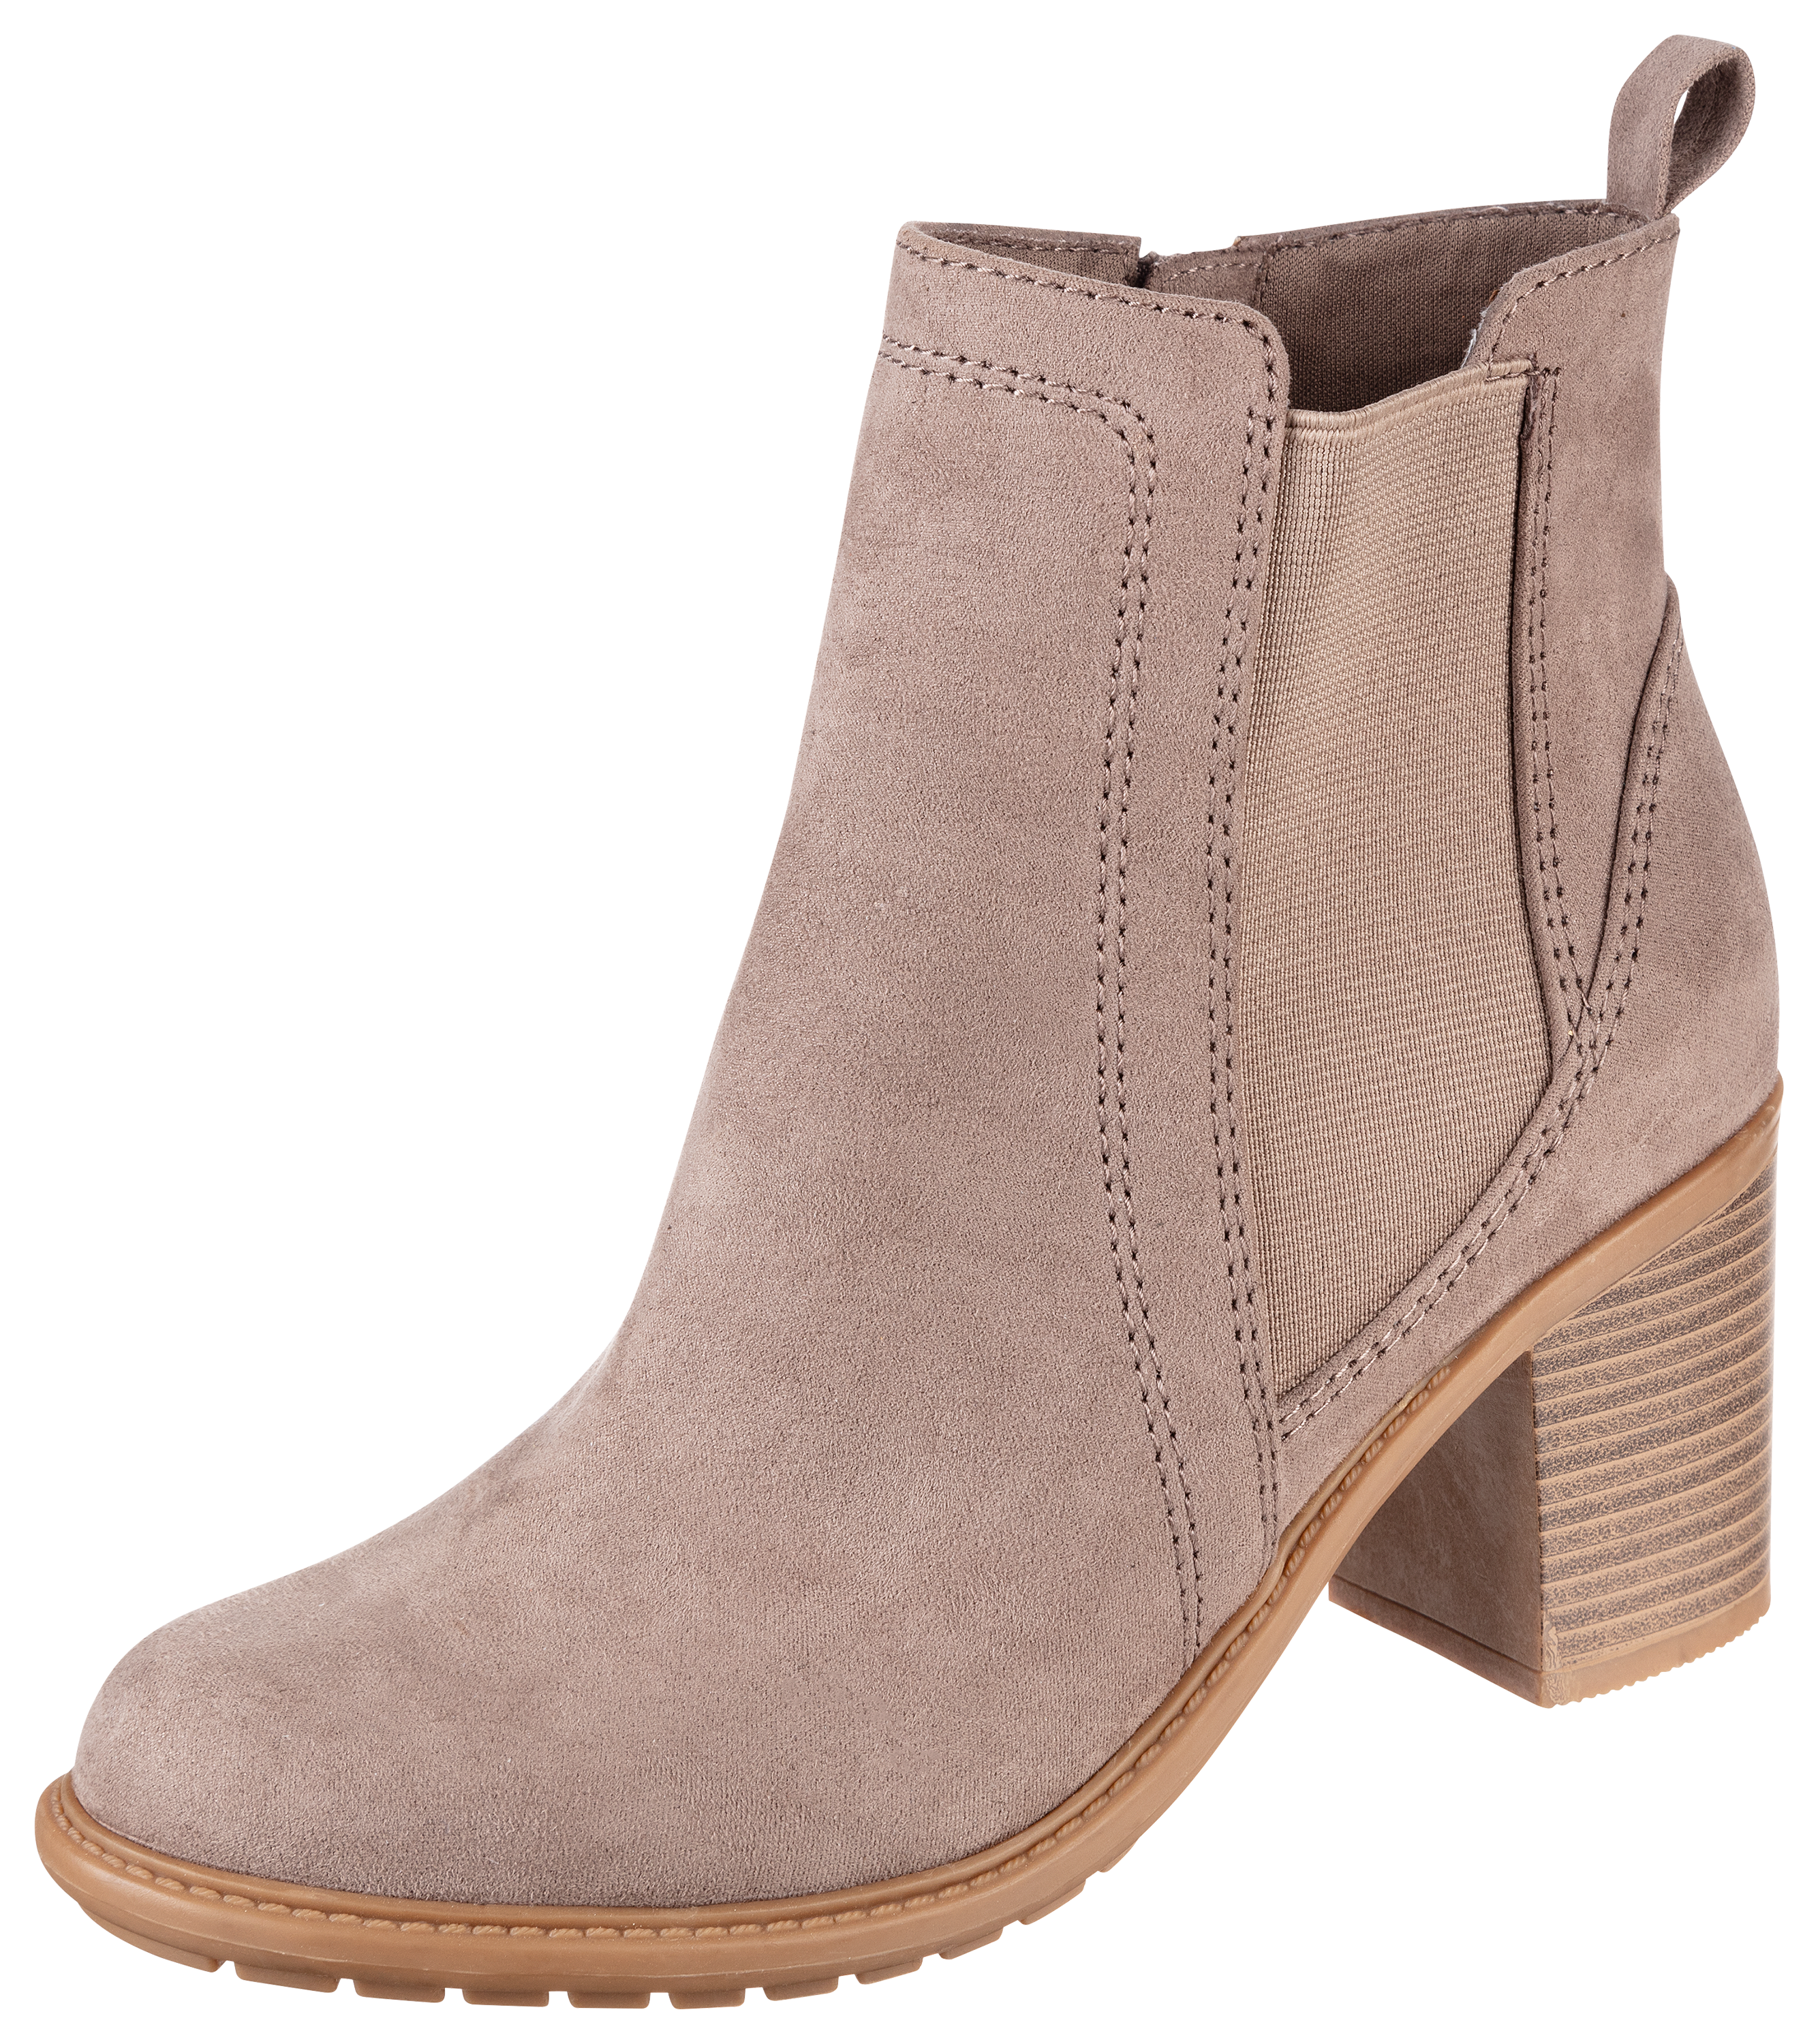 Natural Reflections Natalie II Boots for Ladies - Taupe - 10M